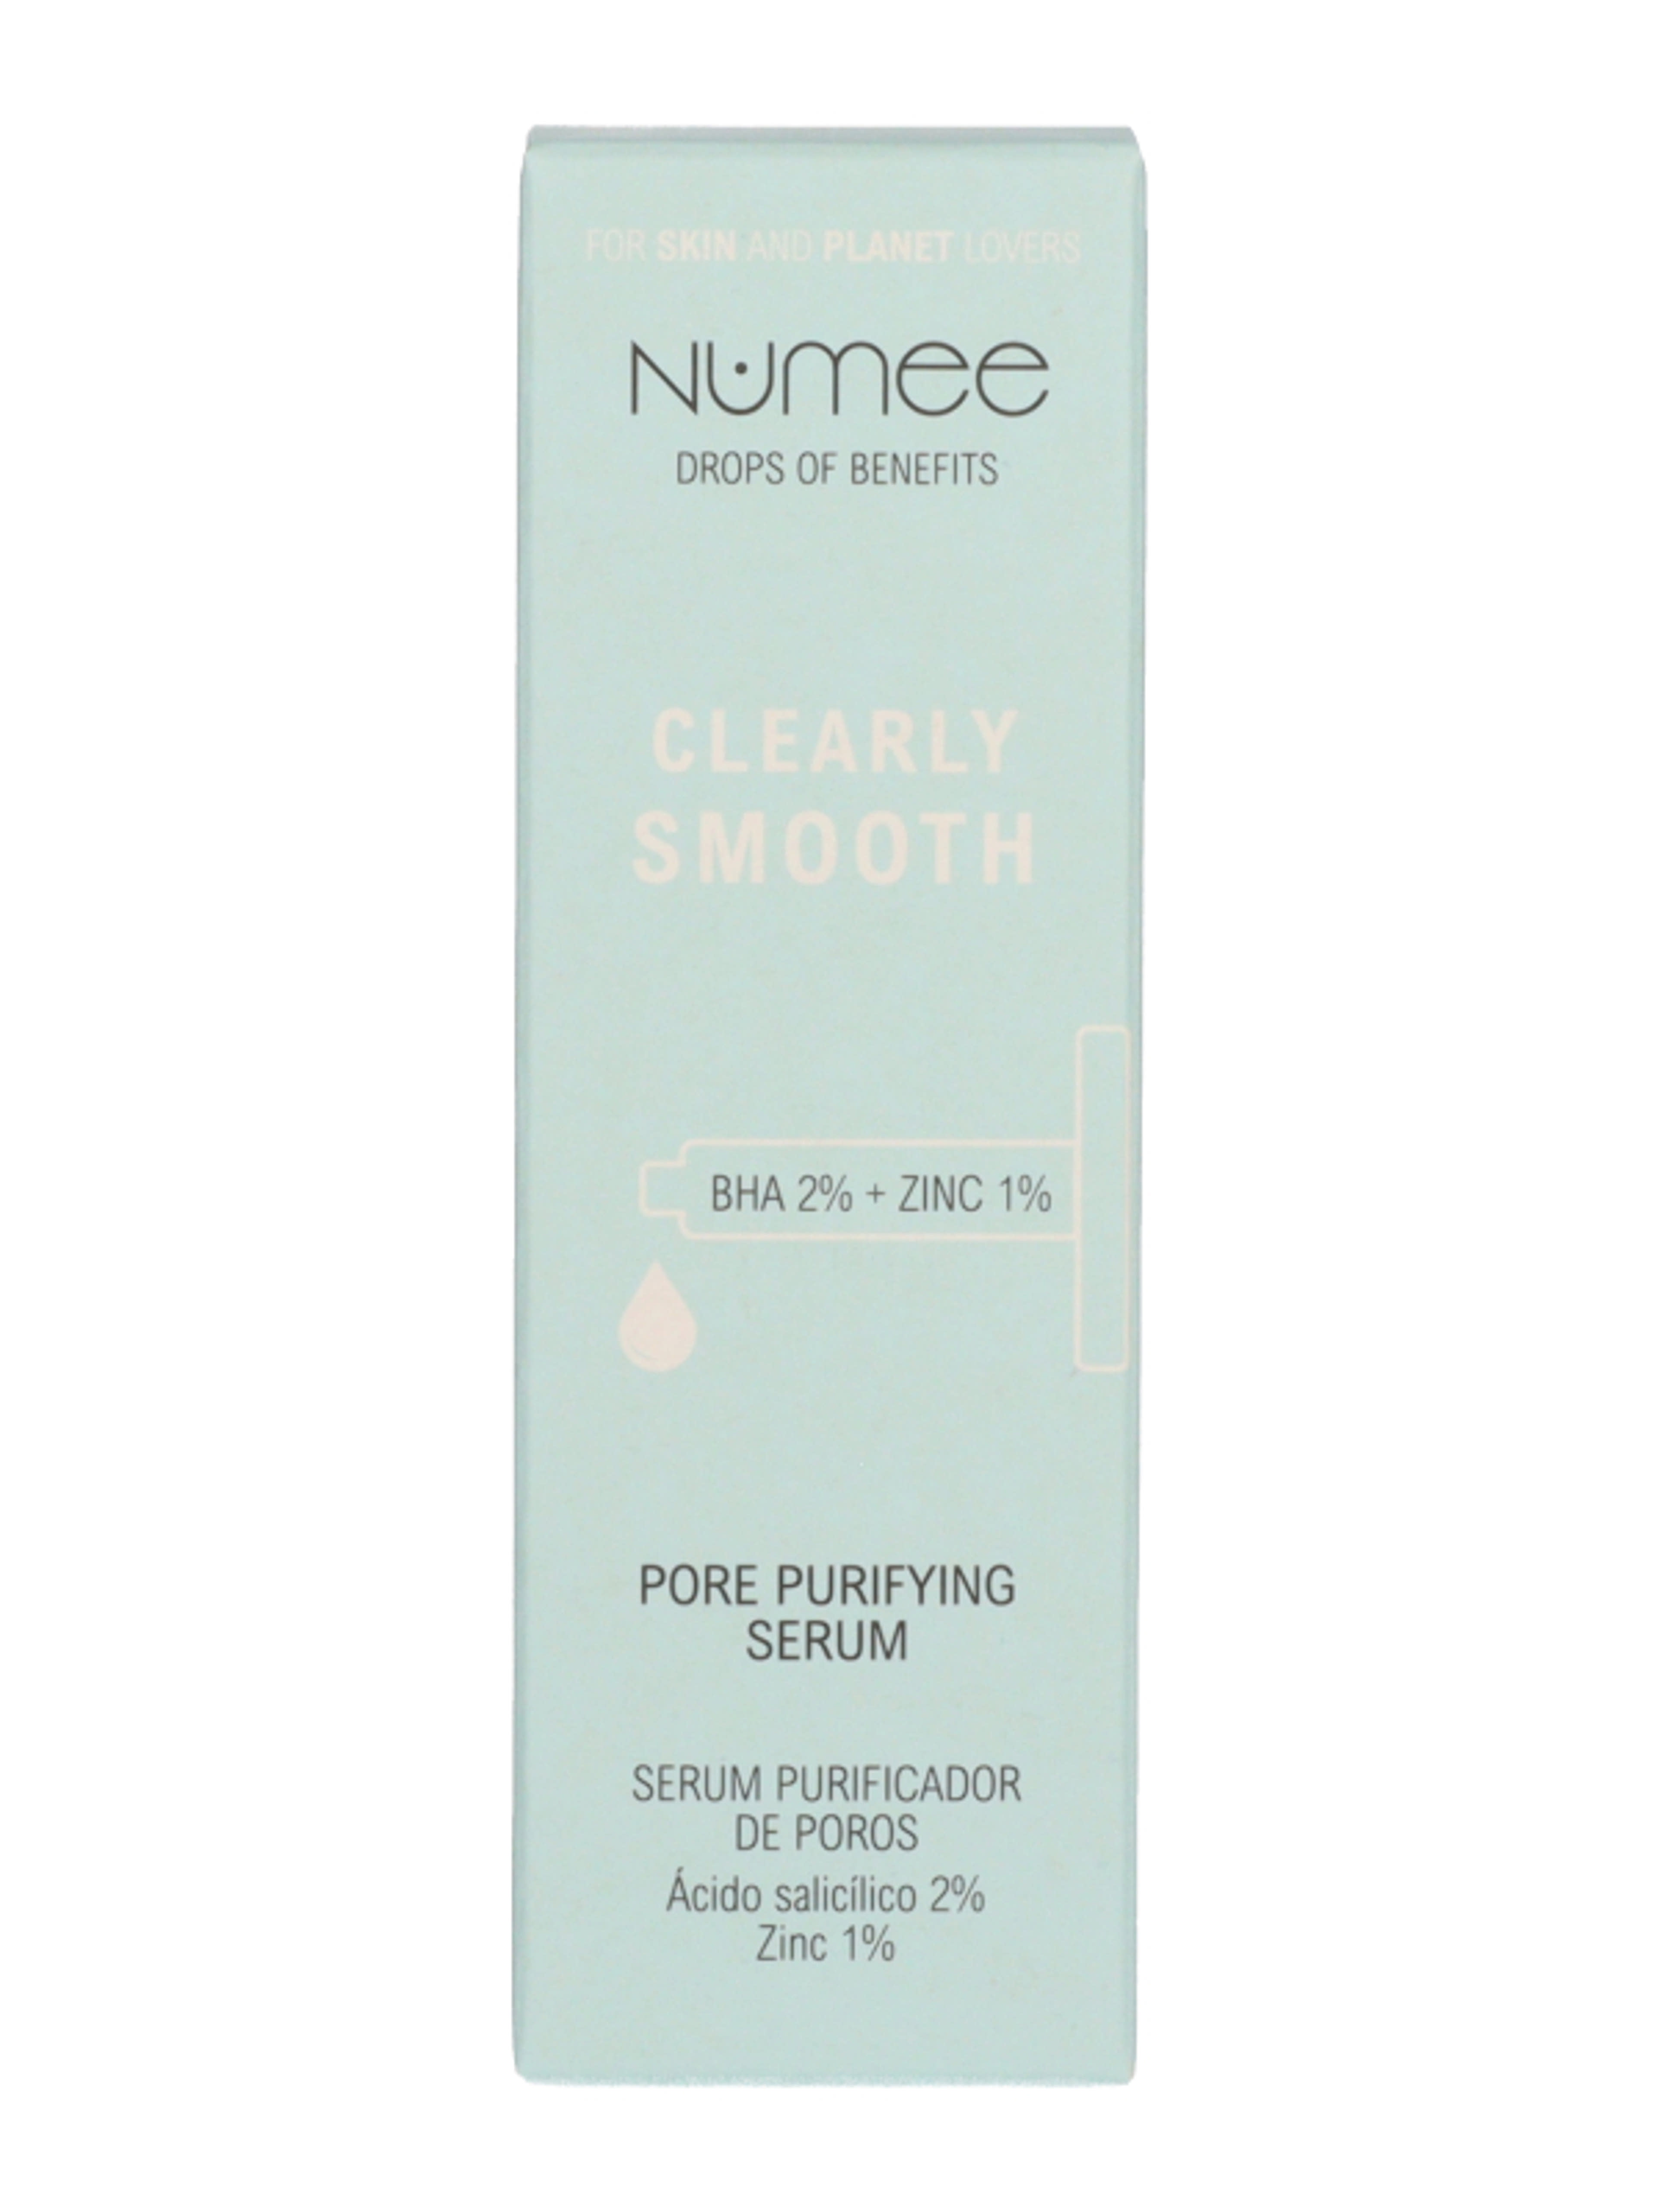 Numee Drops of Benefits Clearly Smooth Salicylic Acid szérum - 30 ml